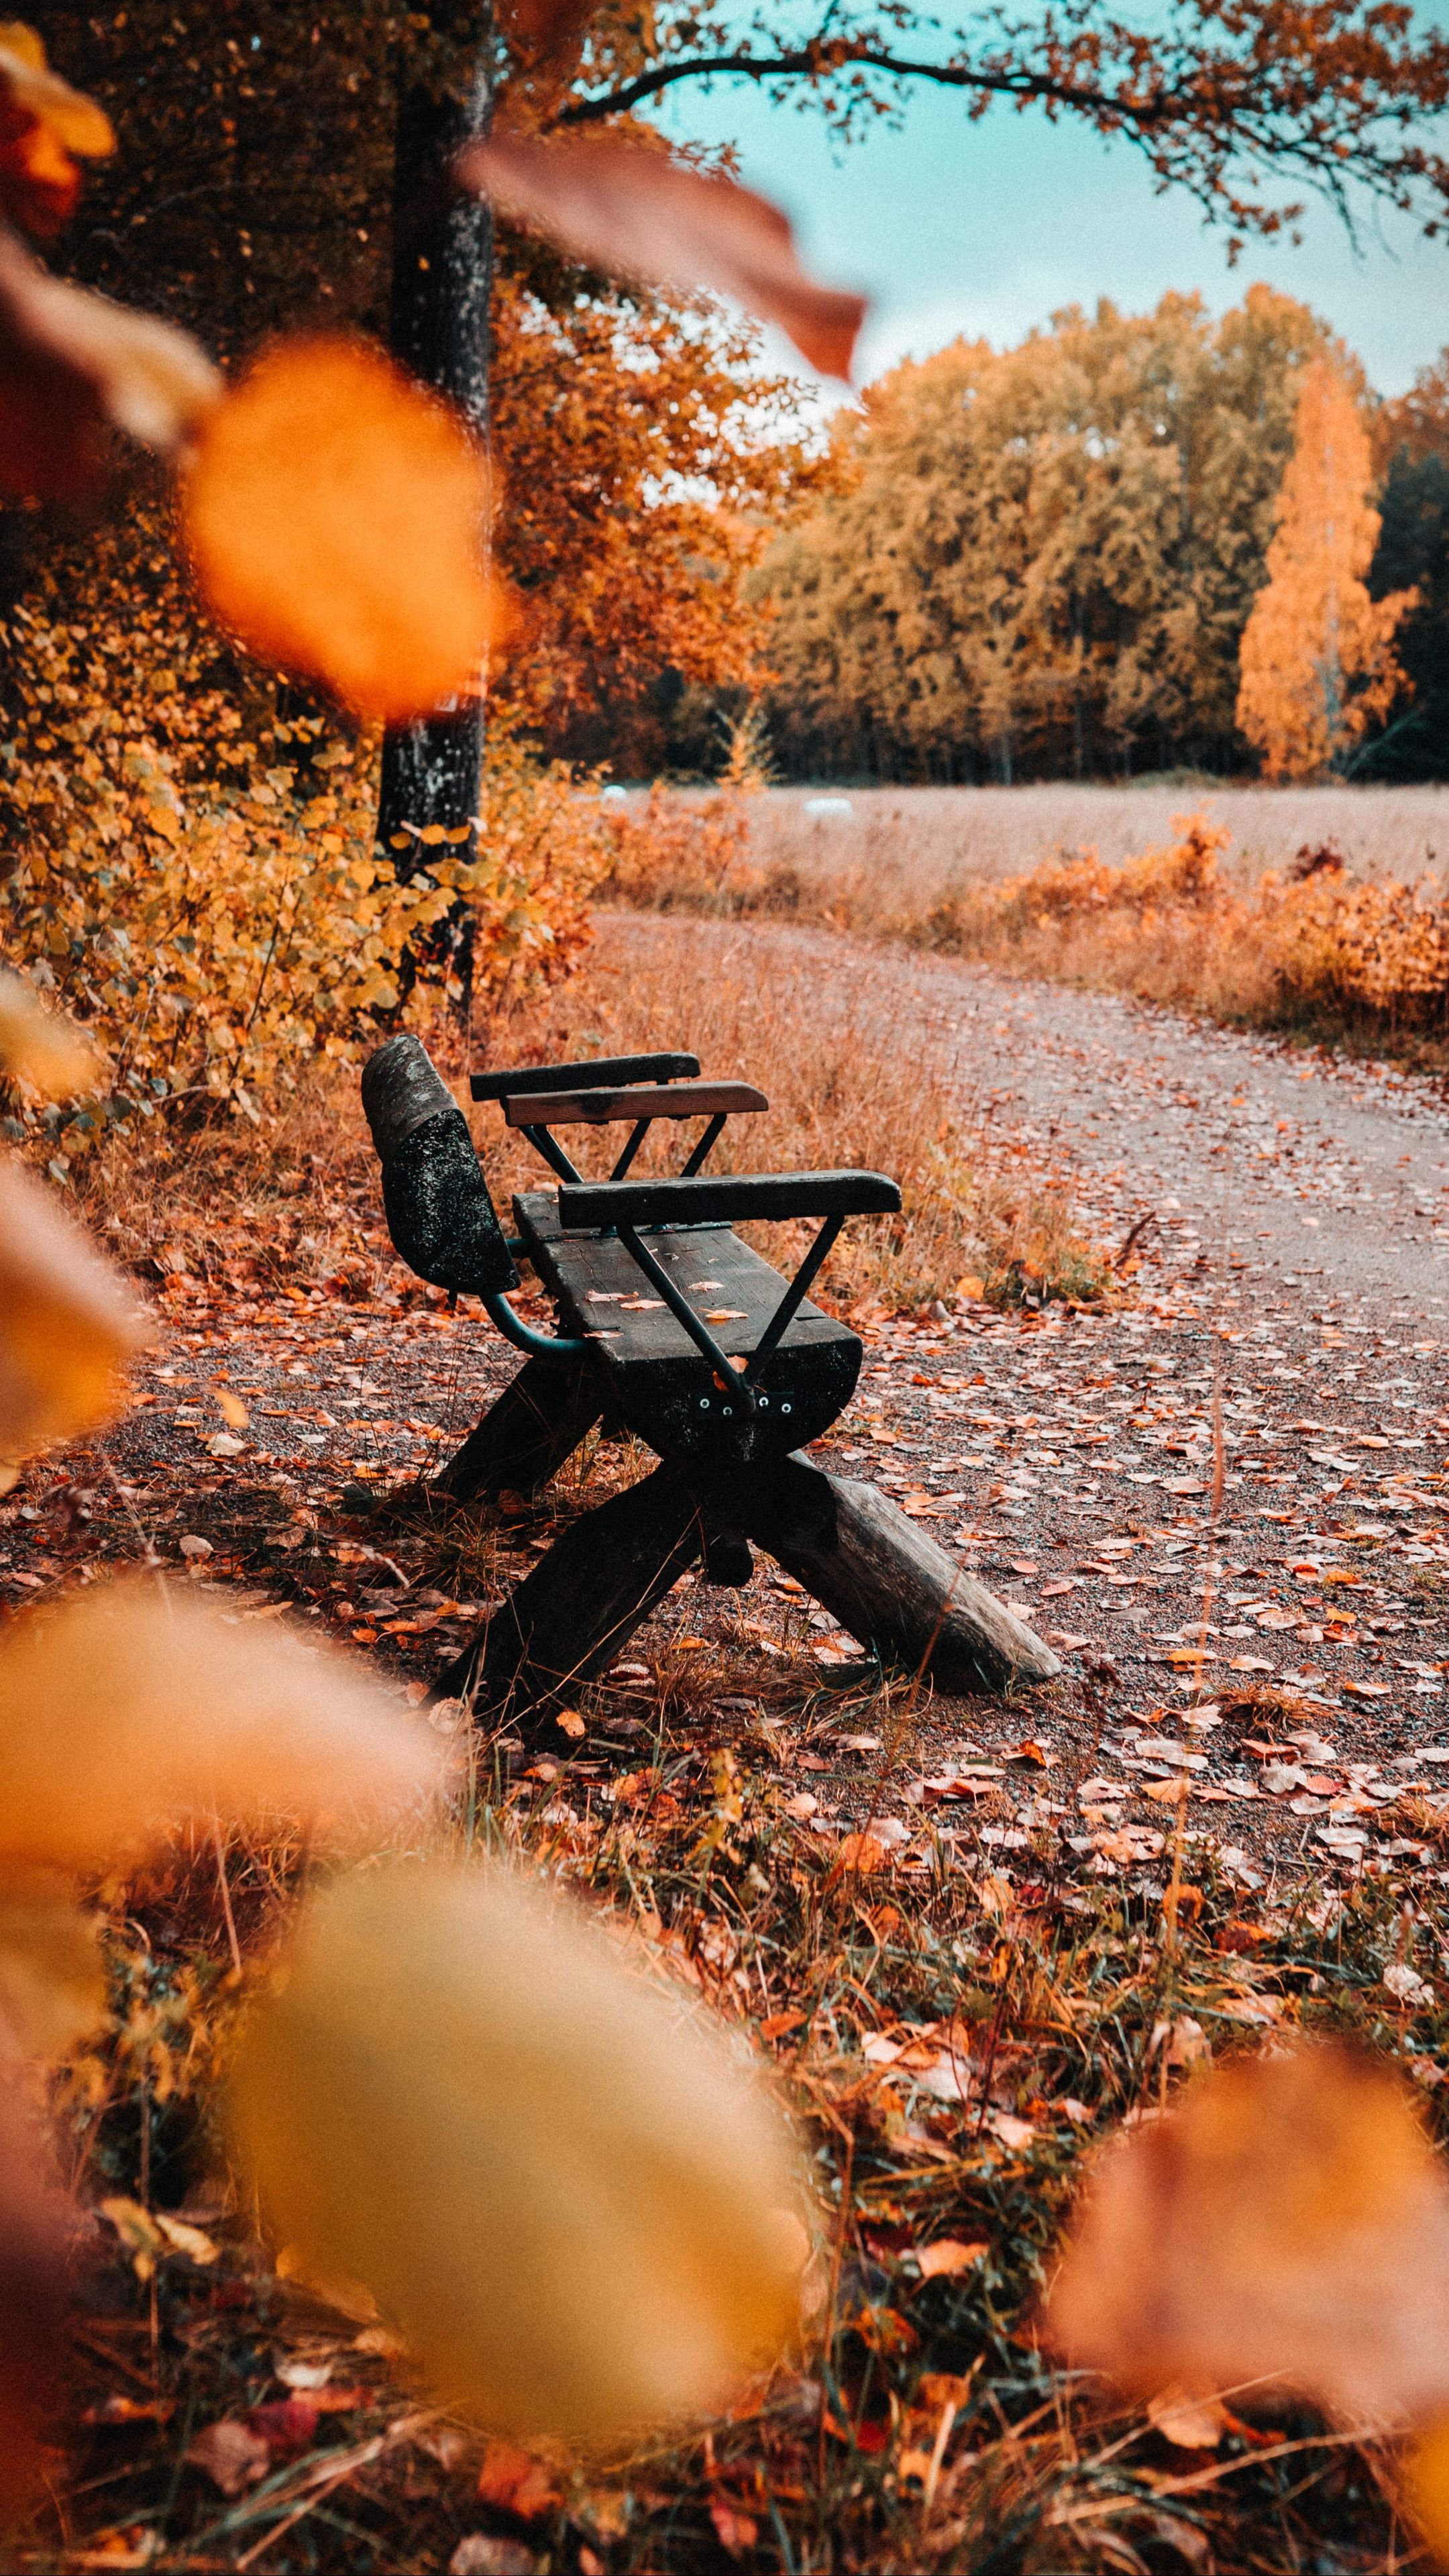 Download wallpaper 2160x3840 bench, nature, autumn, leaves, foliage, yellow  samsung galaxy s4, s5, note, sony xperia z, z1, z2, z3, htc one, lenovo  vibe hd background